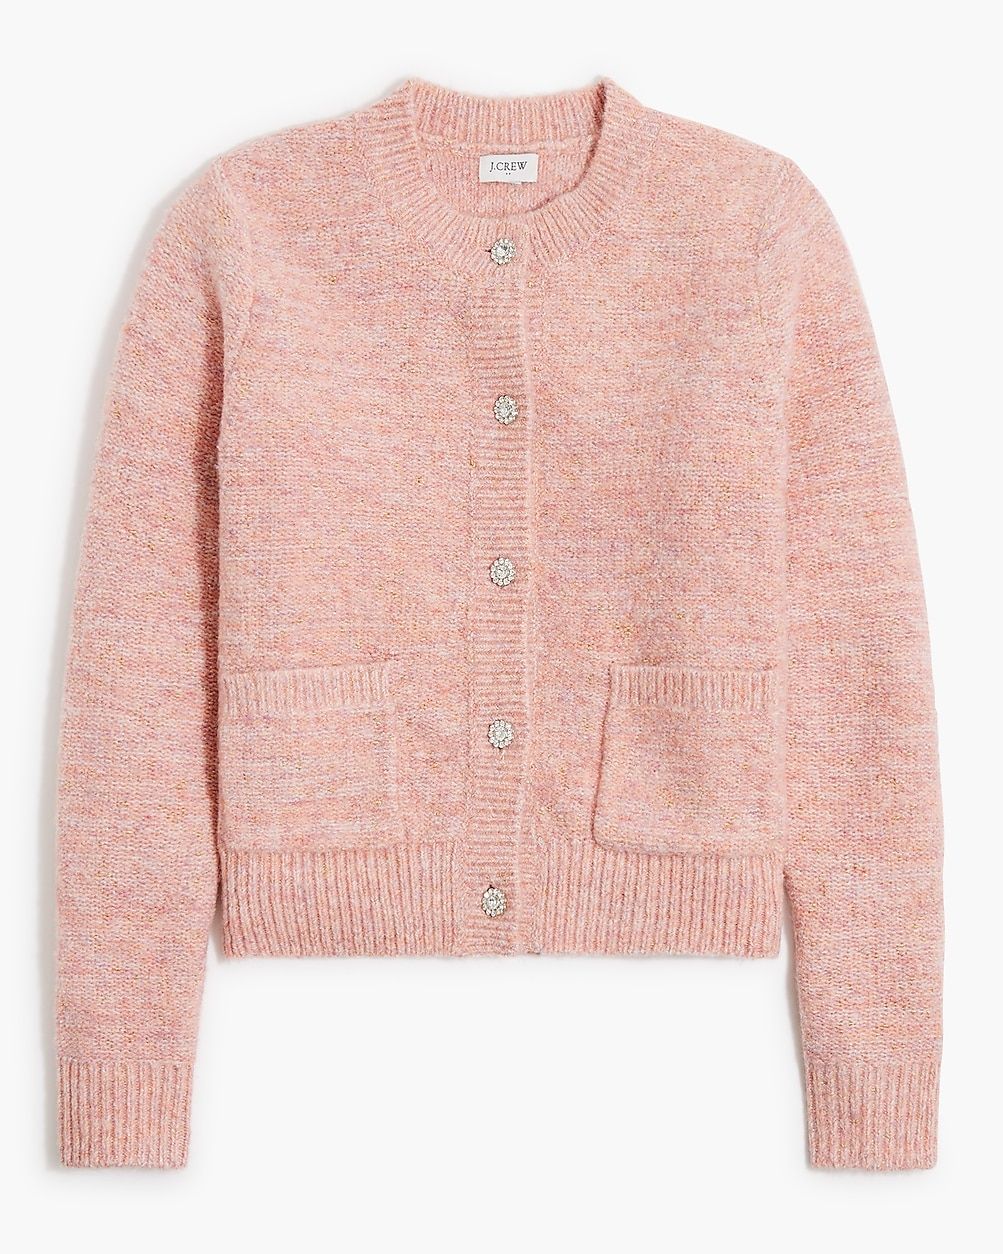 Shimmer lady cardigan sweater | J.Crew Factory